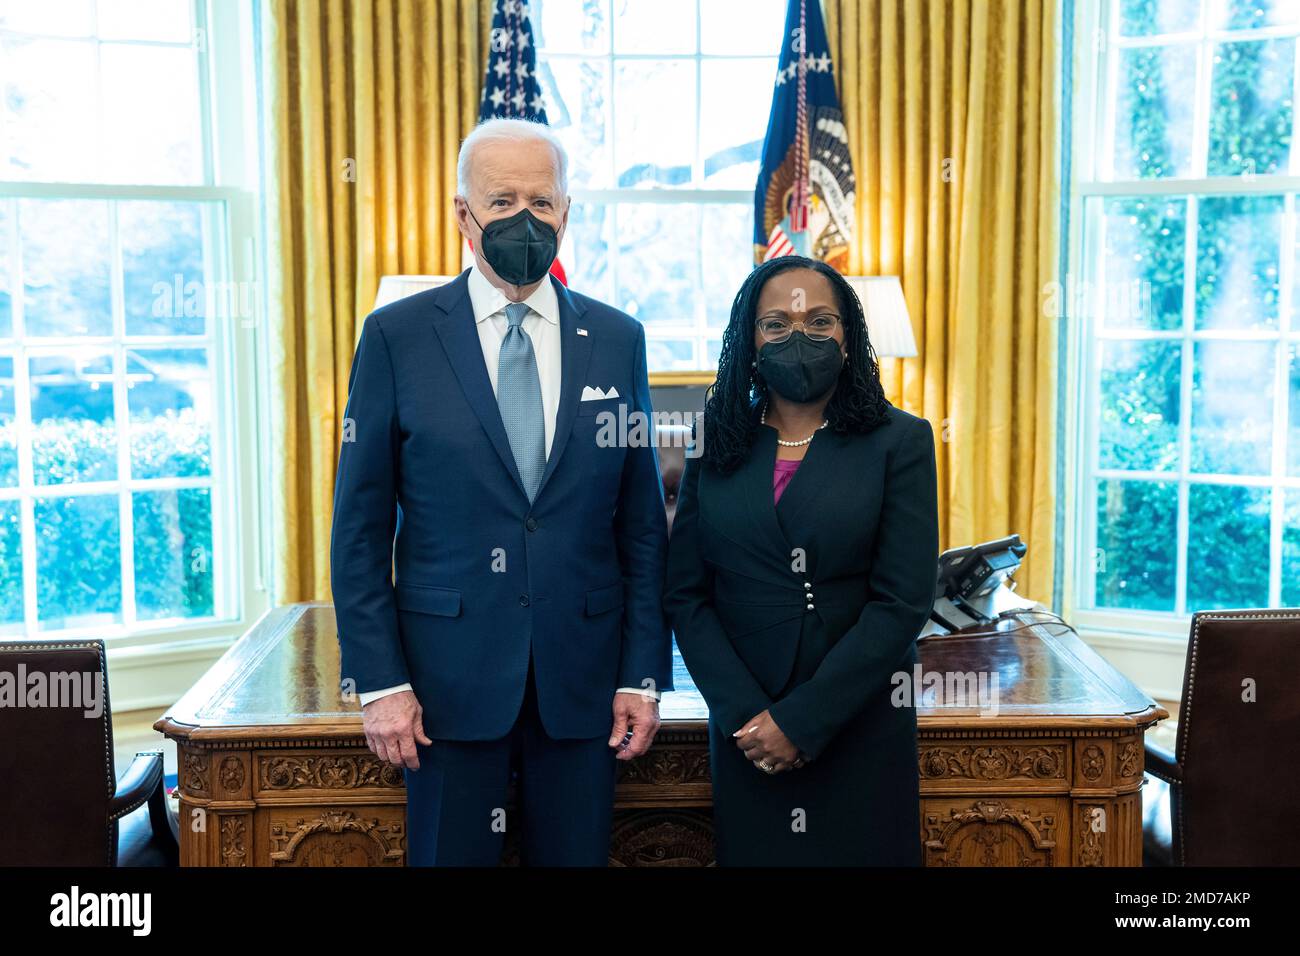 Reportage: President Joe Biden meets Judge Ketanji Brown Jackson in the Oval Office, Friday, February 25, 2022, prior to announcing her nomination to the U.S. Supreme Court. Stock Photo